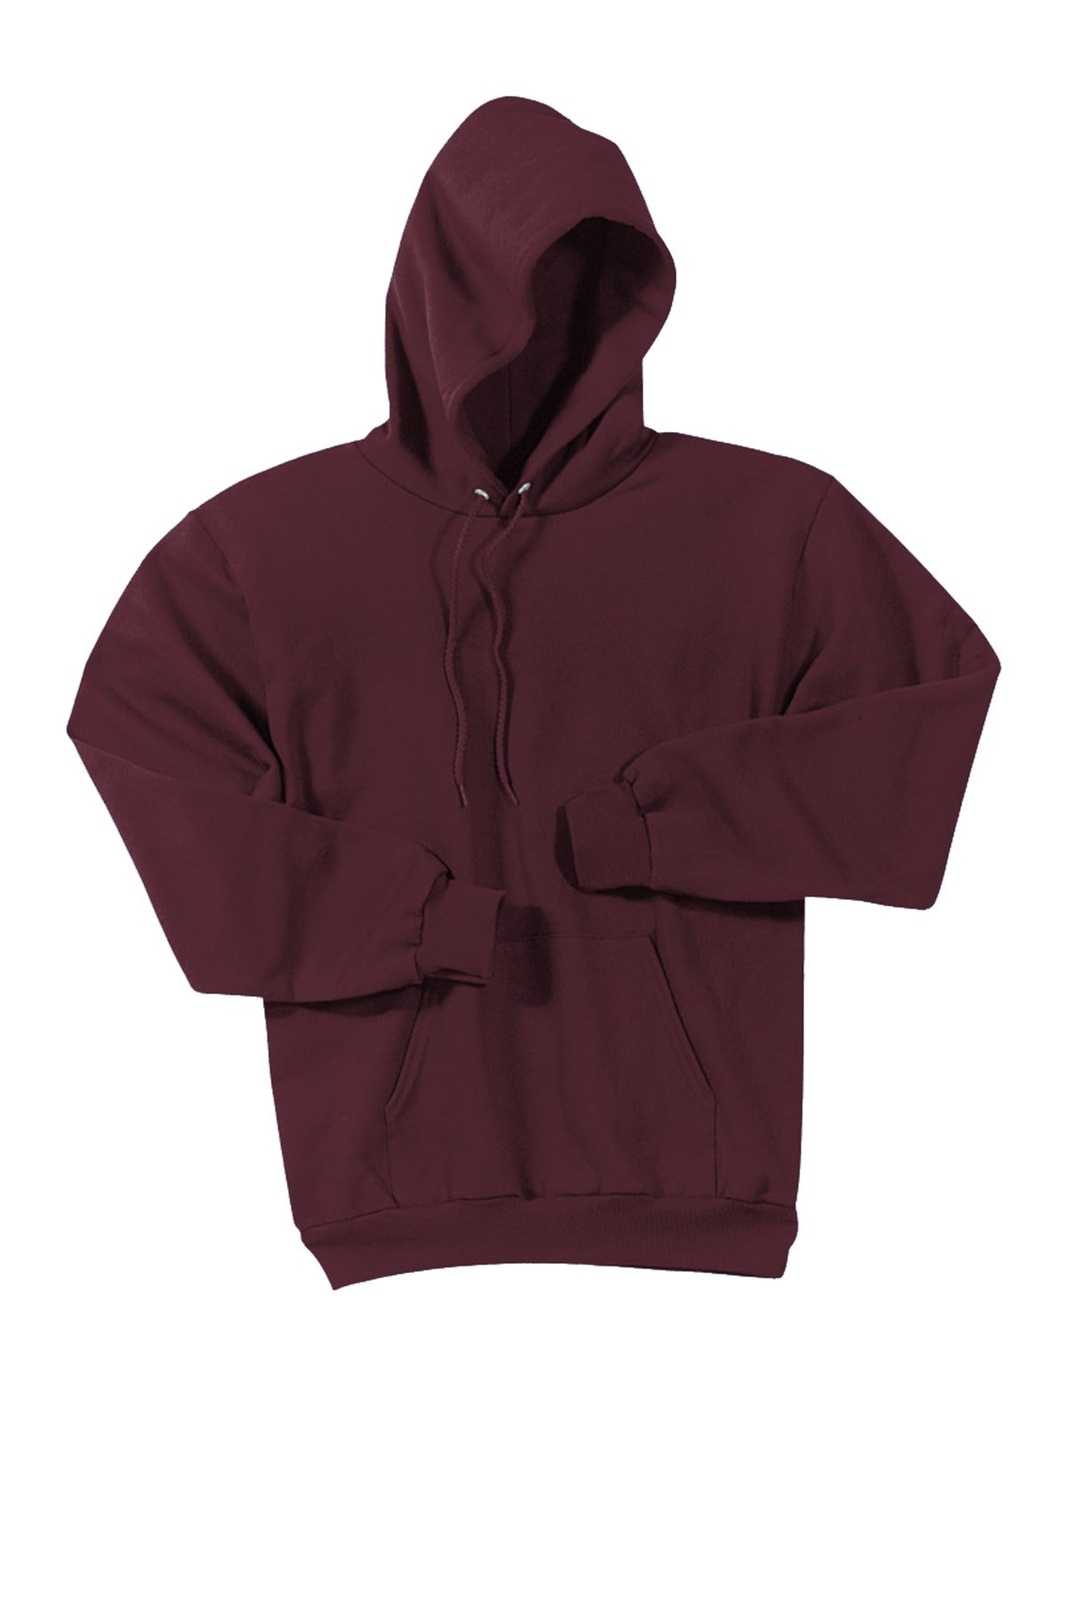 Port & Company PC90HT Tall Essential Fleece Pullover Hooded Sweatshirt - Maroon - HIT a Double - 1